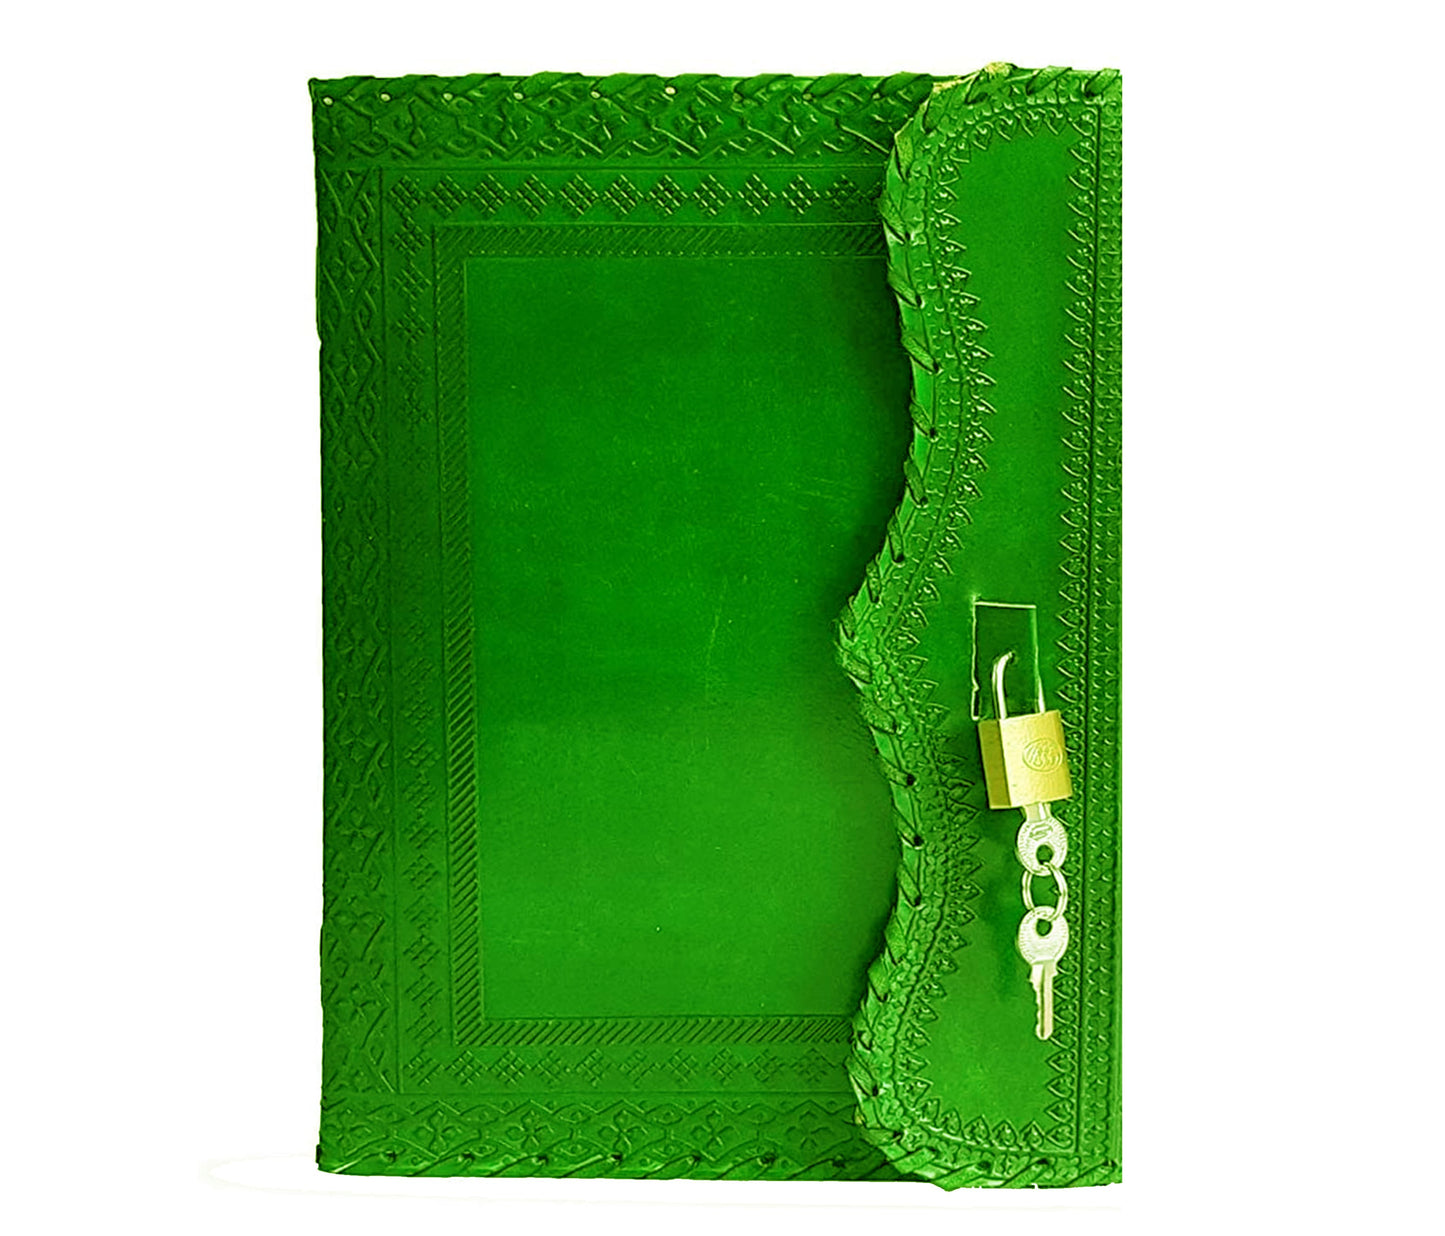 Handmade Vintage Green Leather Journal with Lock